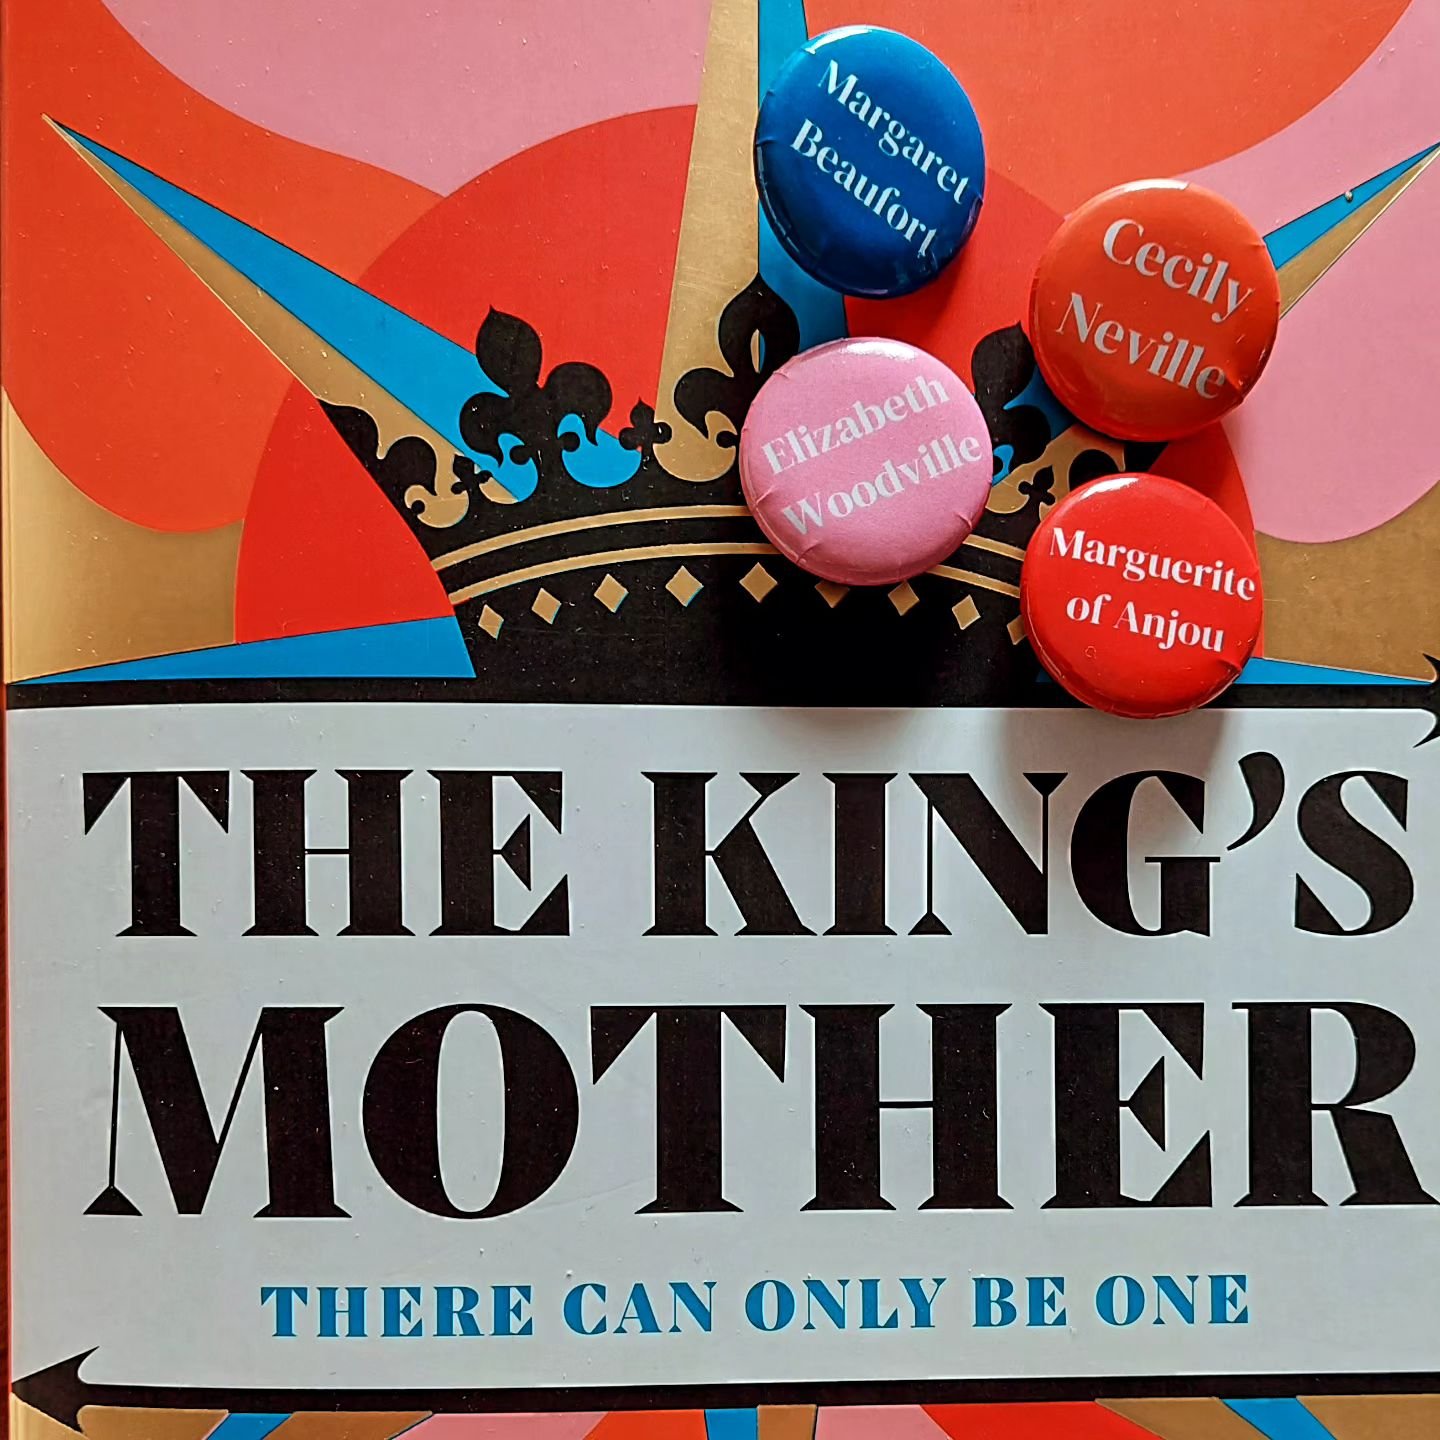 To celebrate Cecily's birthday today (3 May 1415), I'm giving away 5 sets of these fabulous Kings Mother Badges. Which woman's colours will you wear? To win, just follow me and share. 

Cecily Neville - King's Mother 
Marguerite - deposed Queen
Eliza